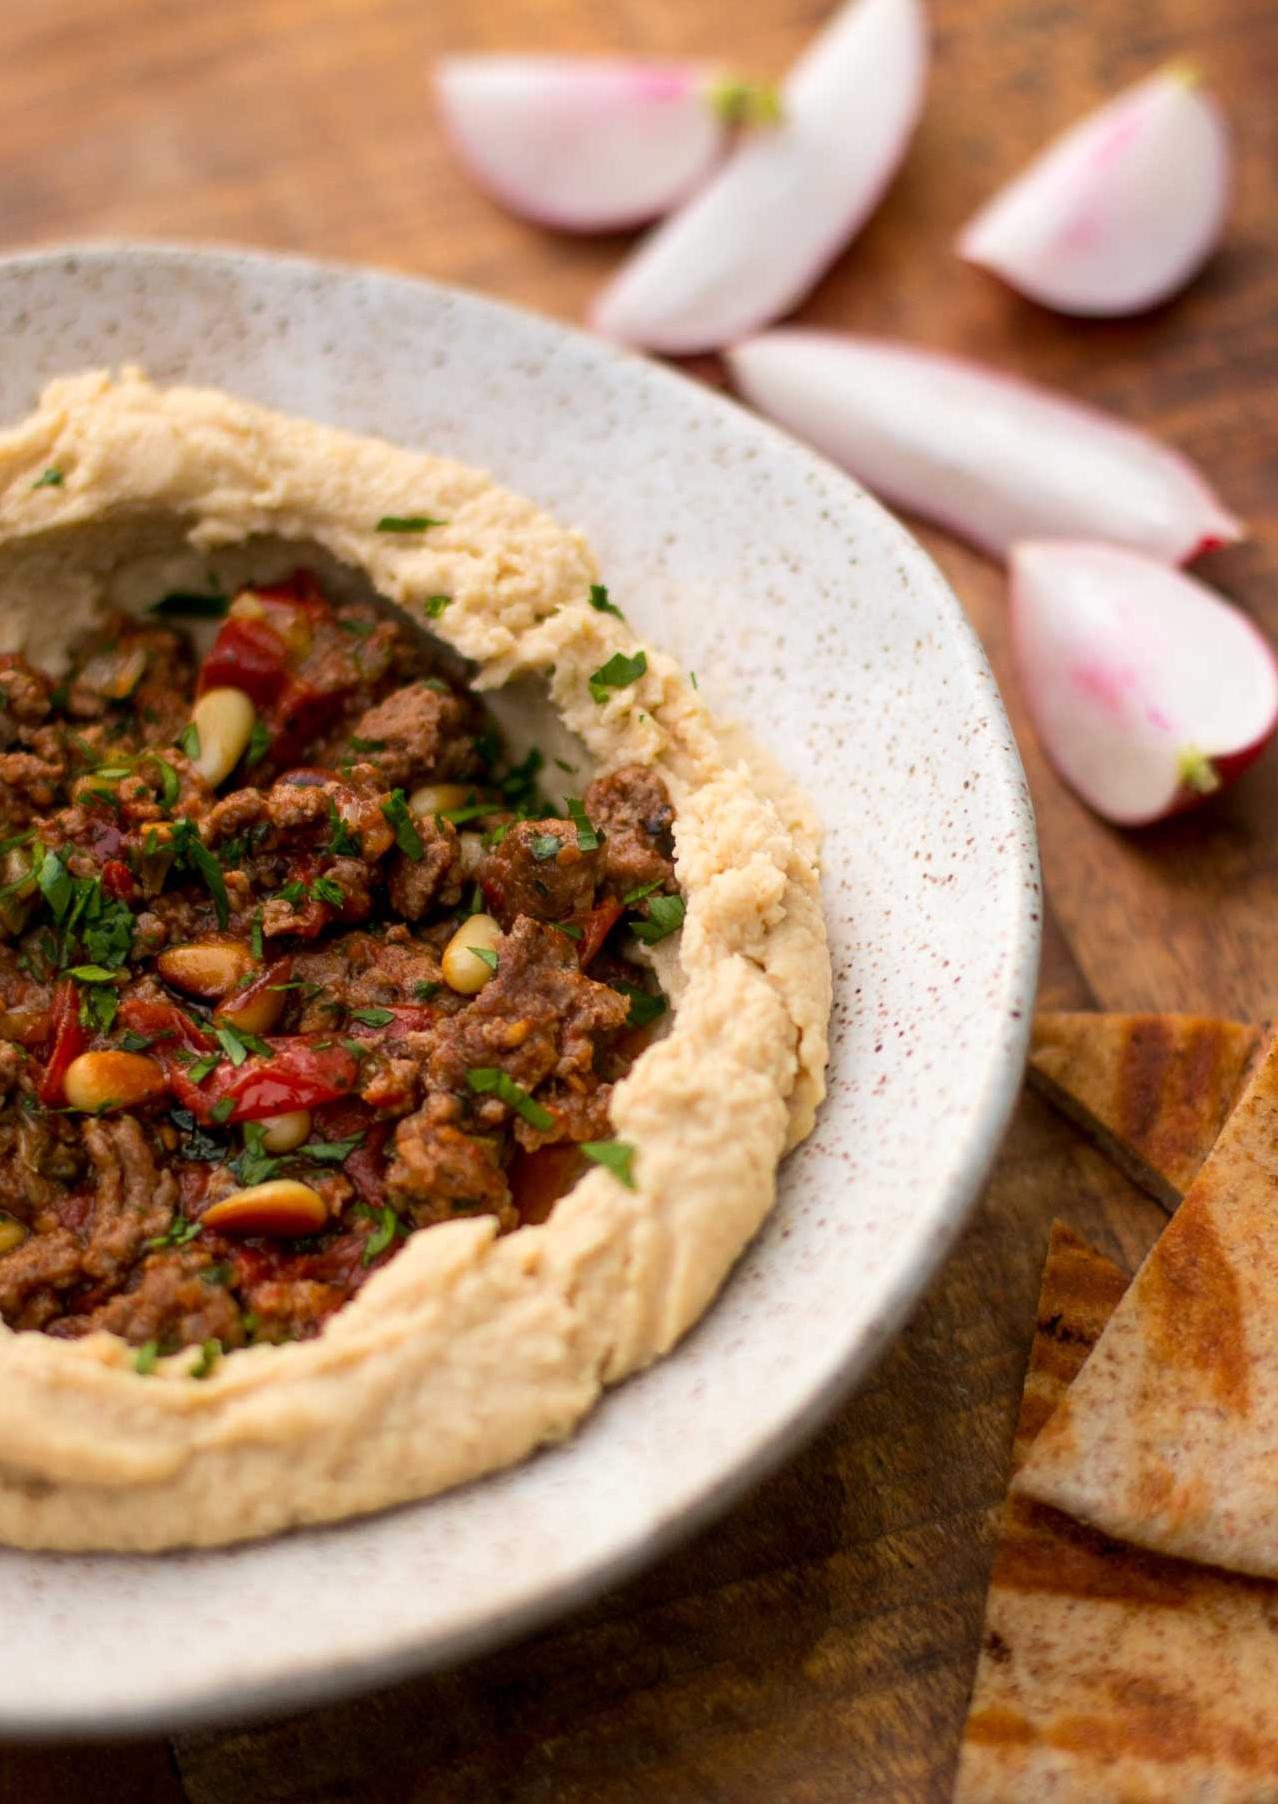  Creamy homemade hummus to complement the flavorful lamb